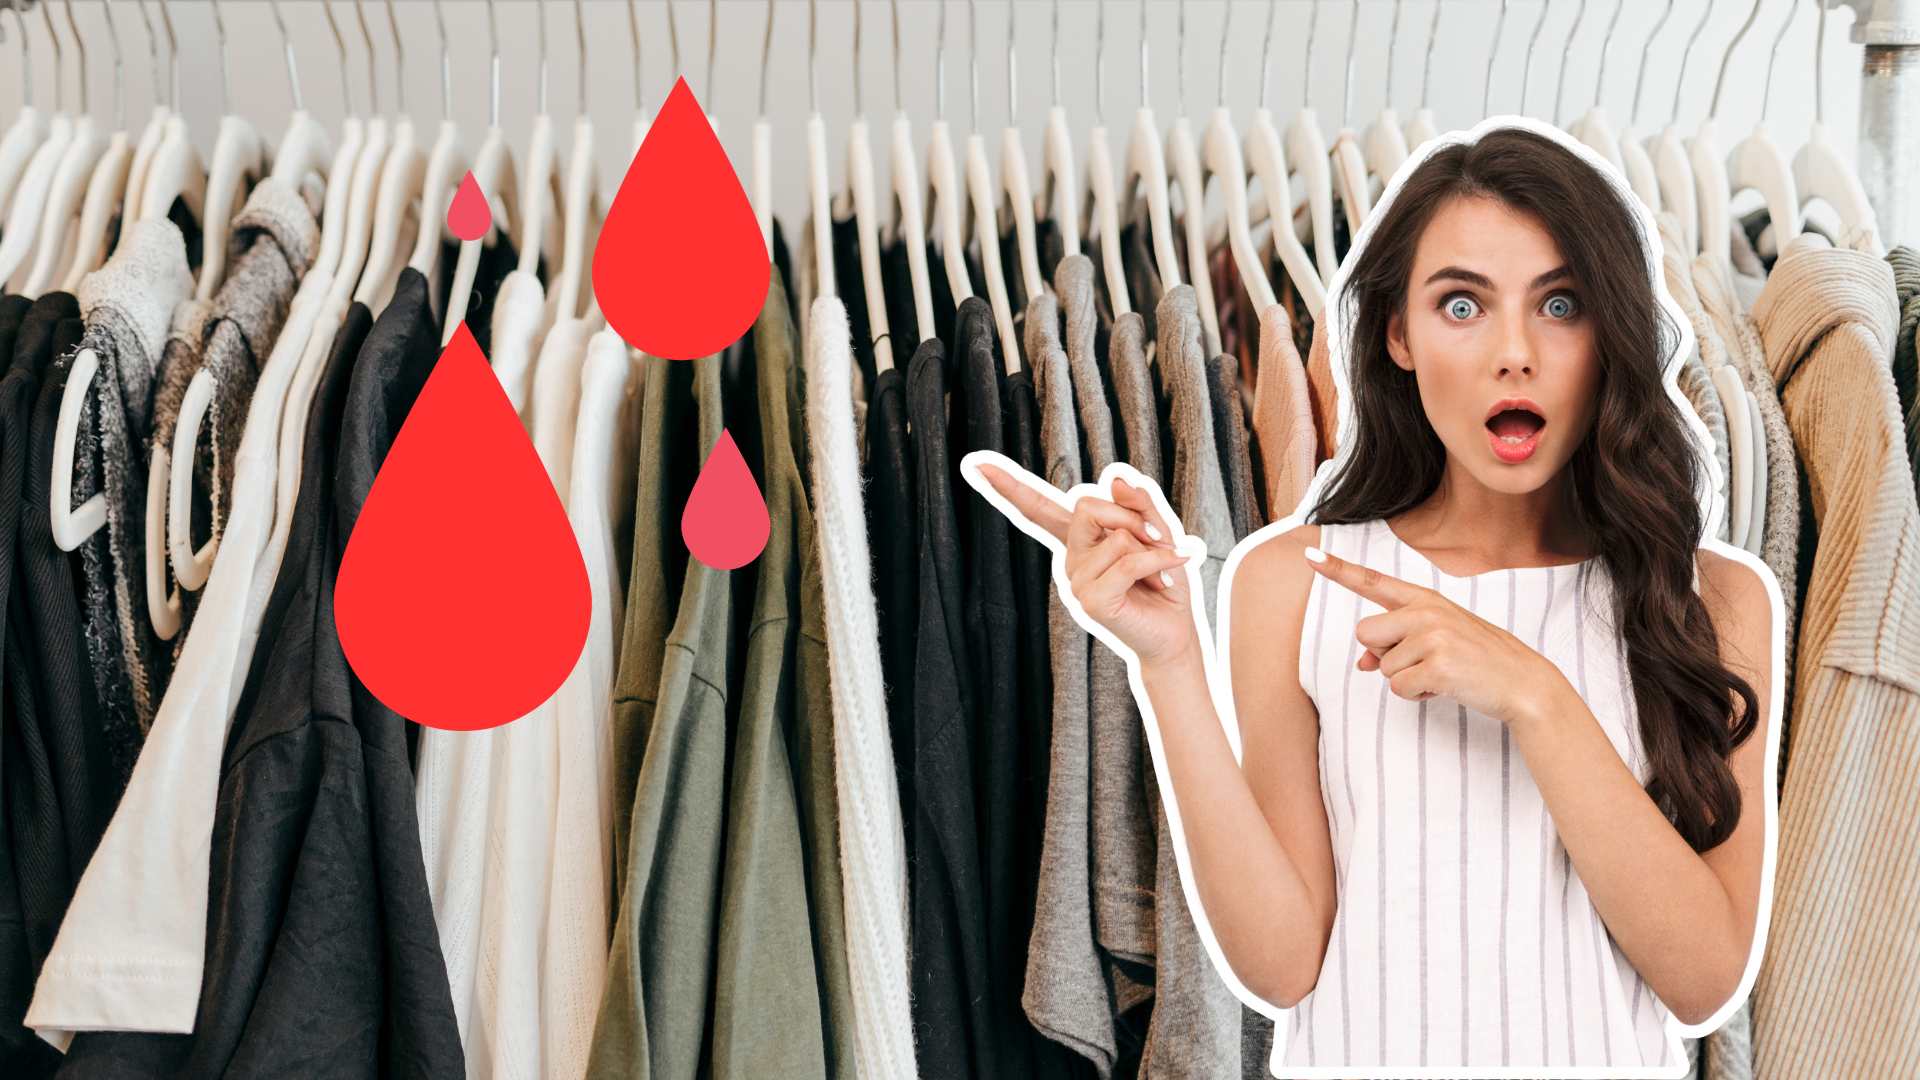 How to get Blood Stains Out of Clothes (2 Easy Steps)